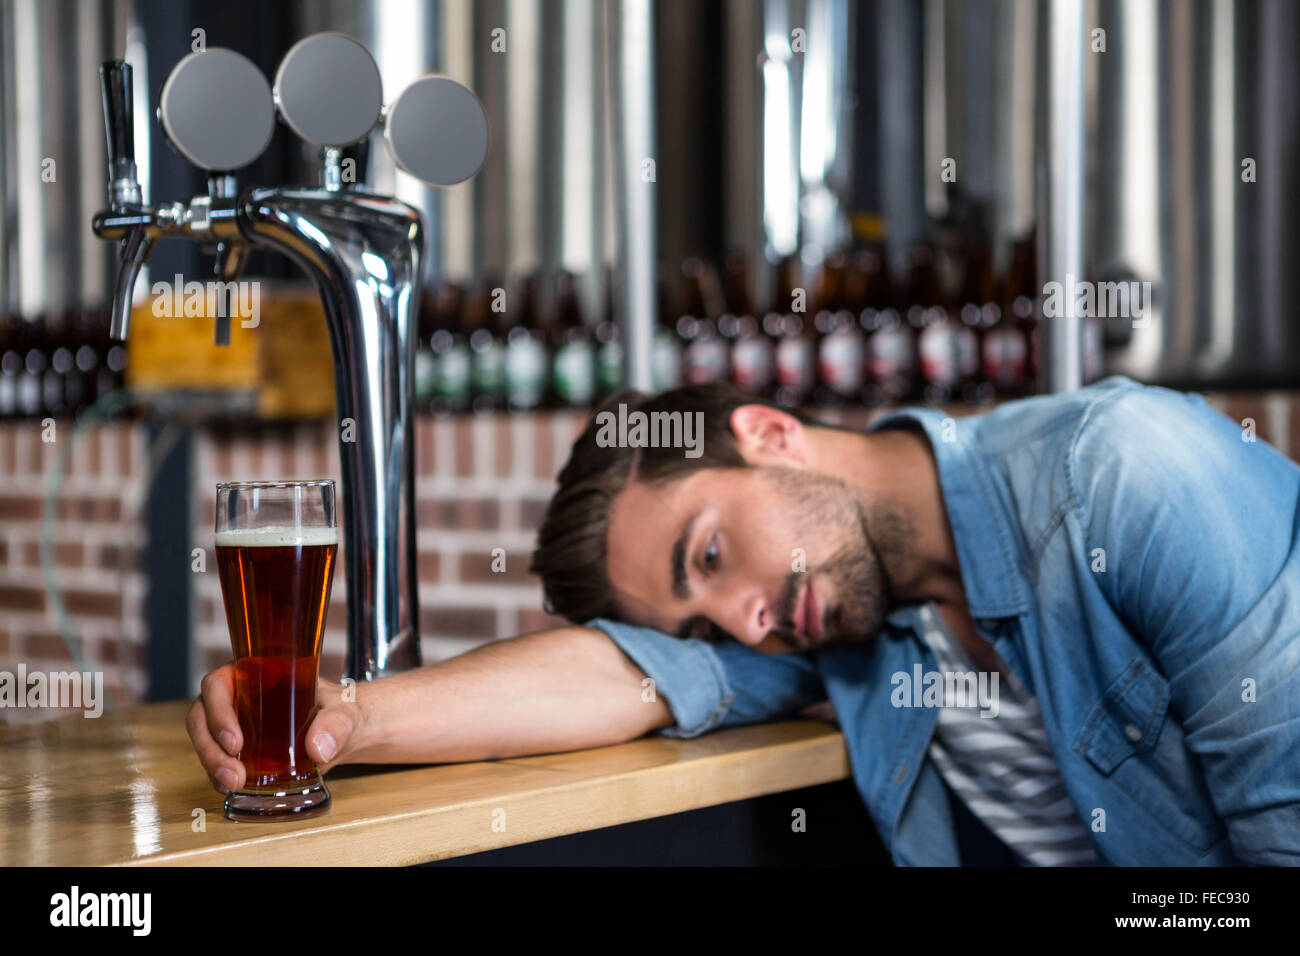 Tired man leaning on counter Stock Photo - Alamy